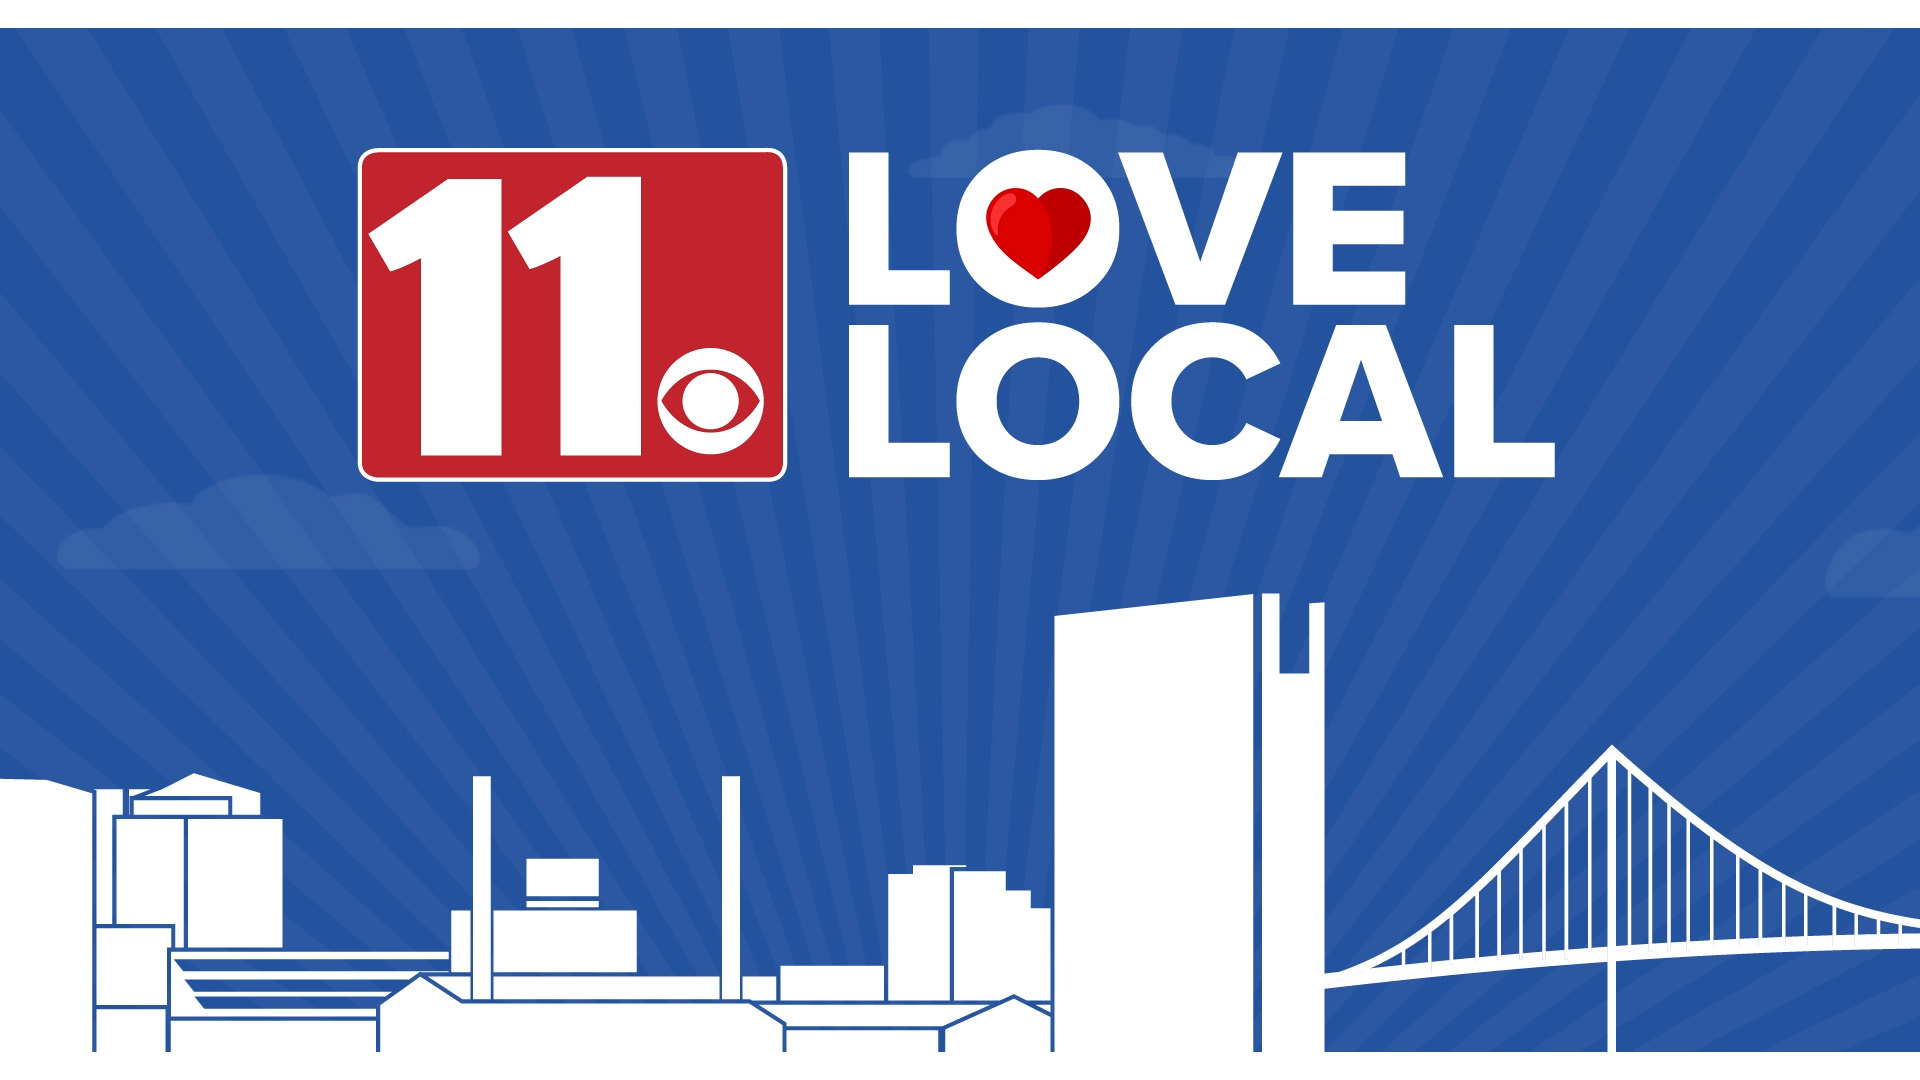 "Love Local" is an interactive database that promotes businesses and restaurants throughout our area that you can help support during these uncertain times.